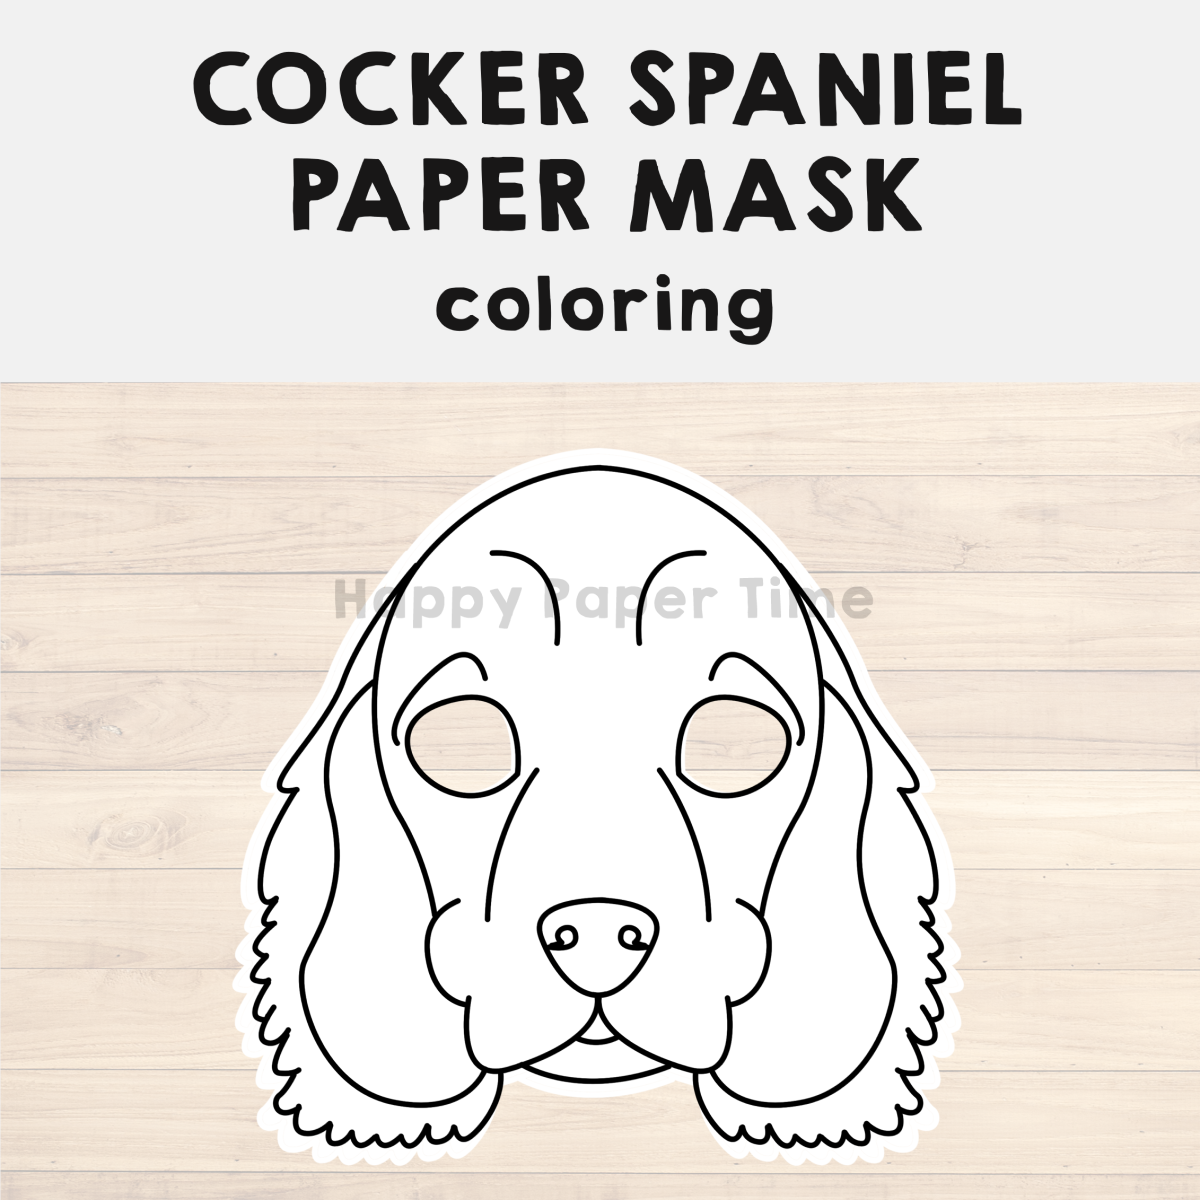 Cocker spaniel paper mask printable dog animal coloring craft activity made by teachers